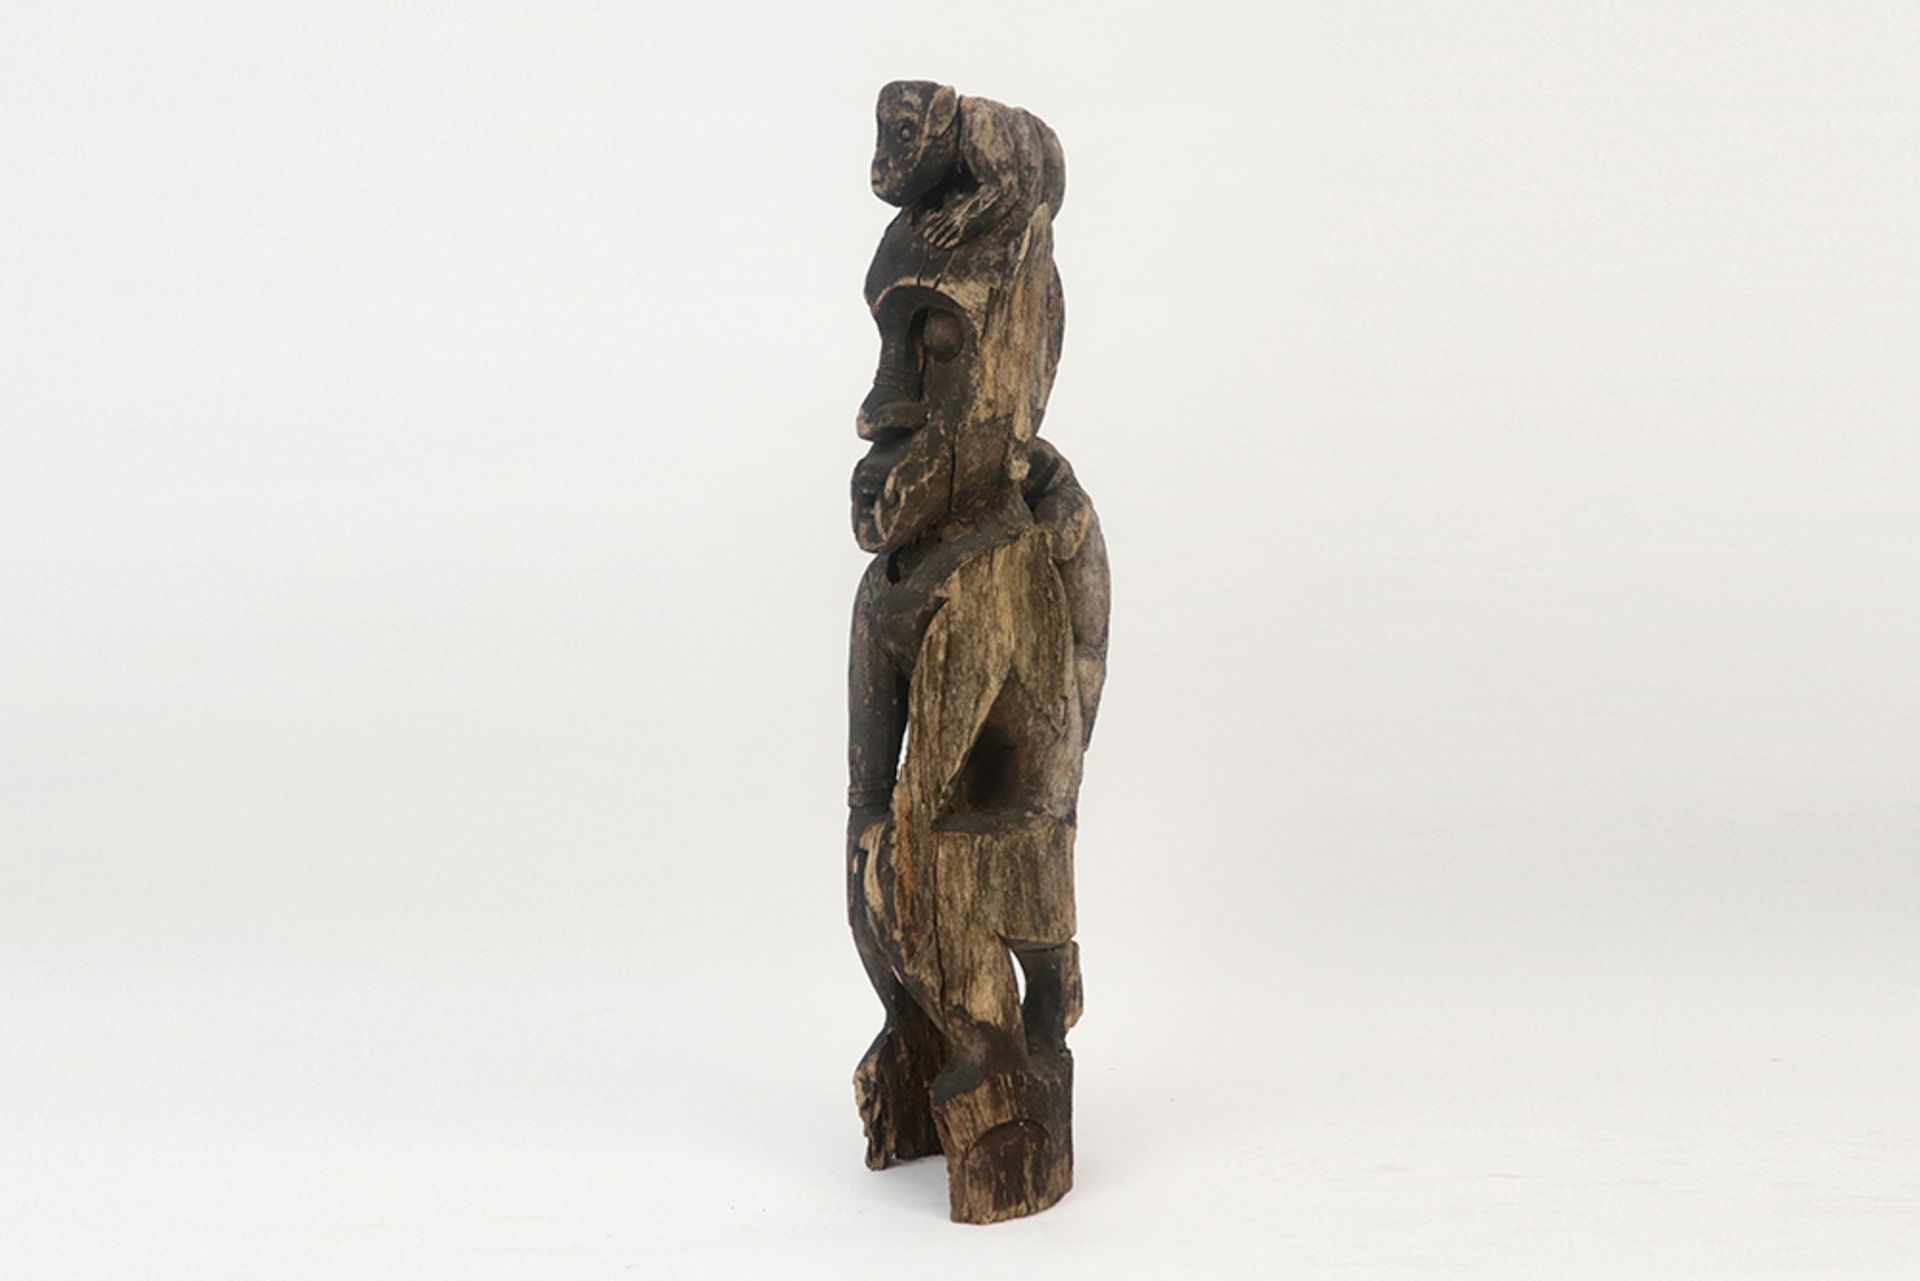 original Bahau Dayak sculpture in wood with the represenstation of a mythical figure with an - Image 2 of 4